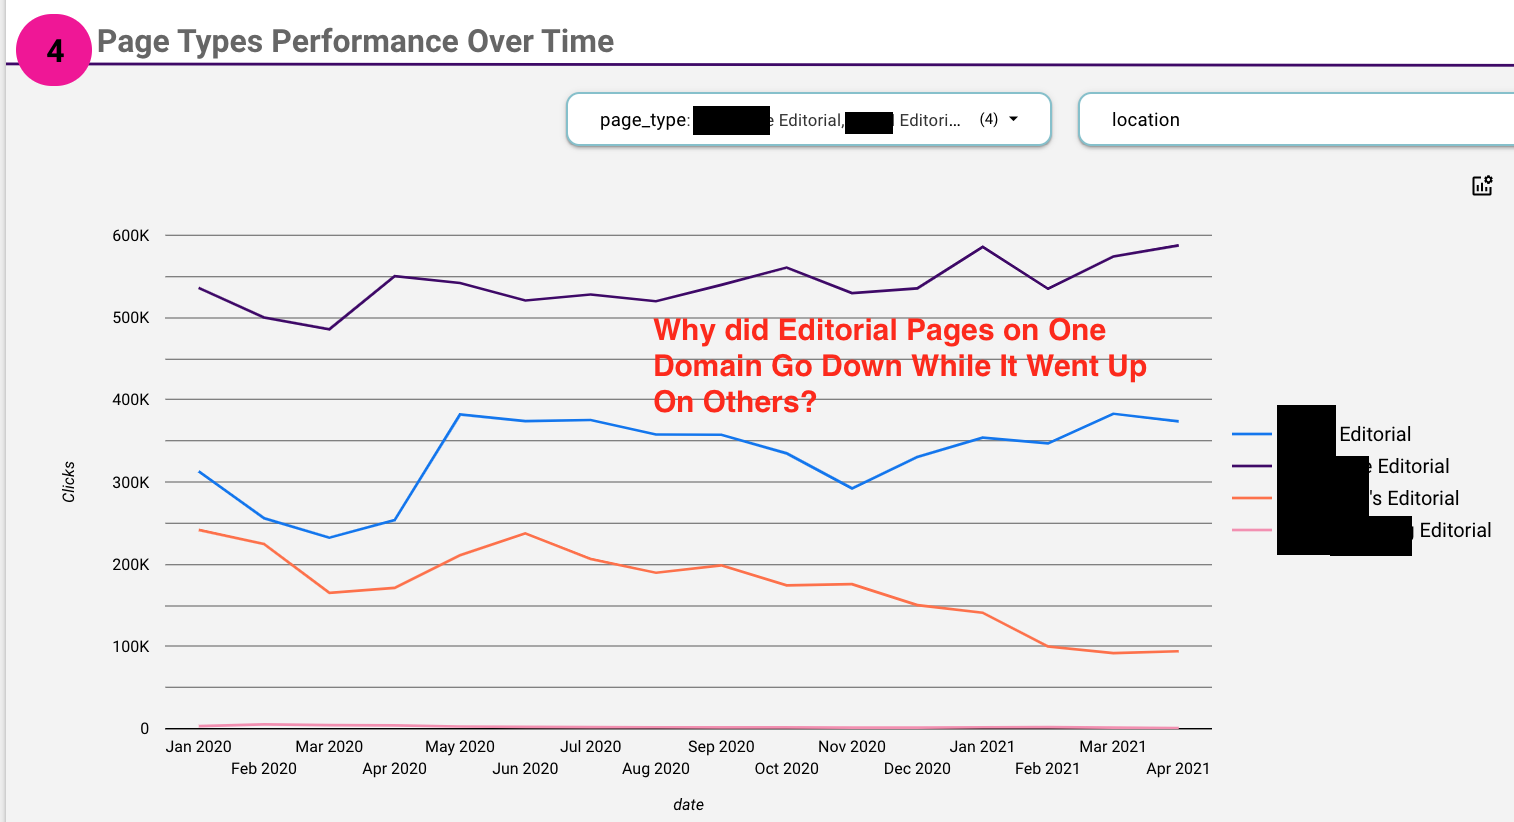 Page types performance over time.